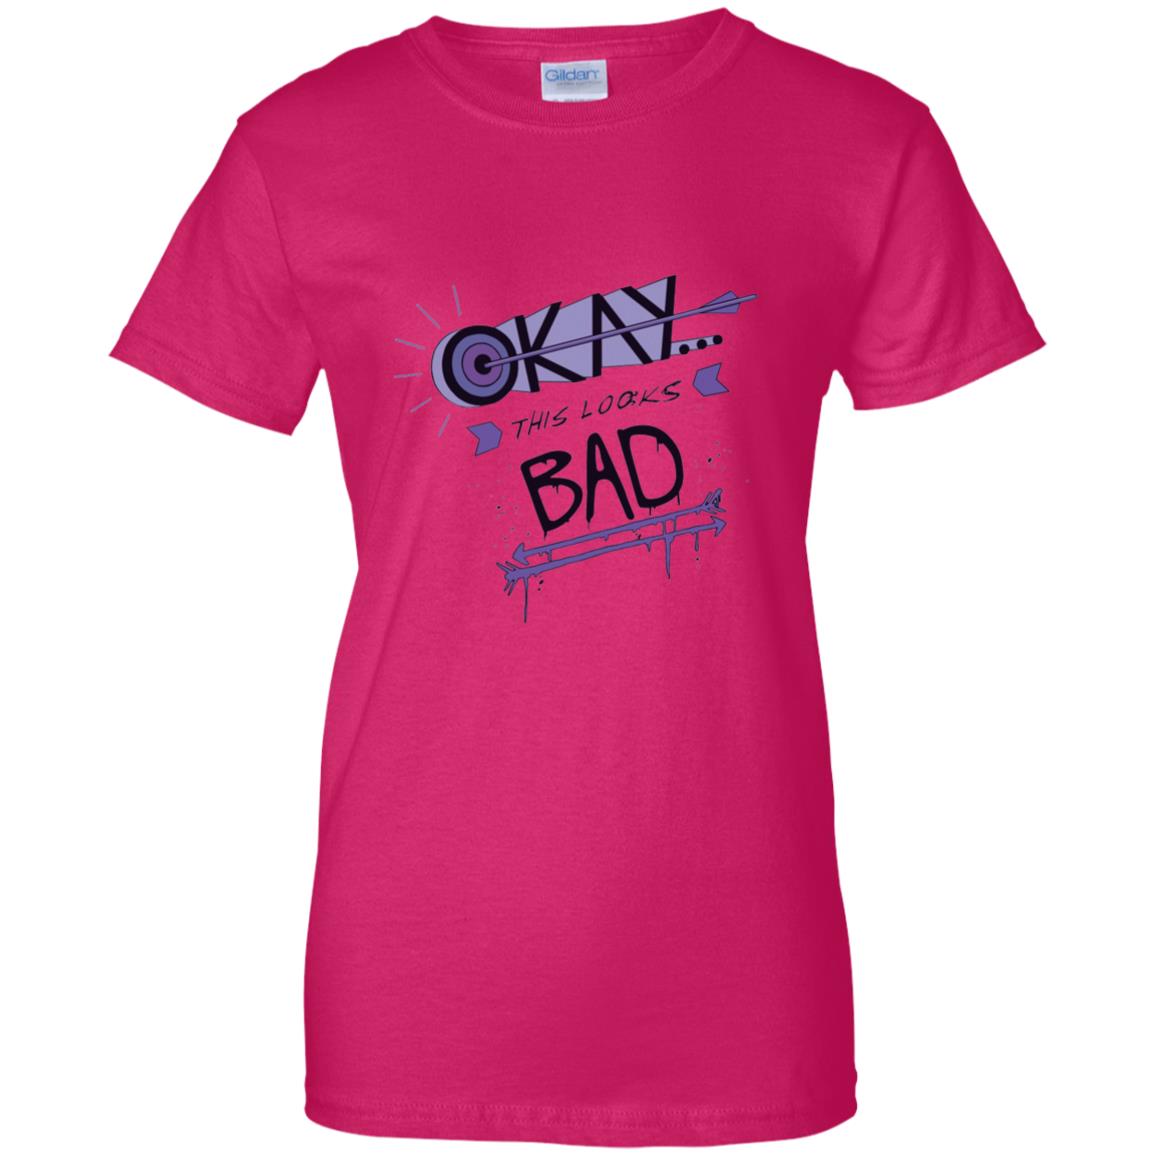 hawkguy womens t shirt - lady t shirt - pink heliconia